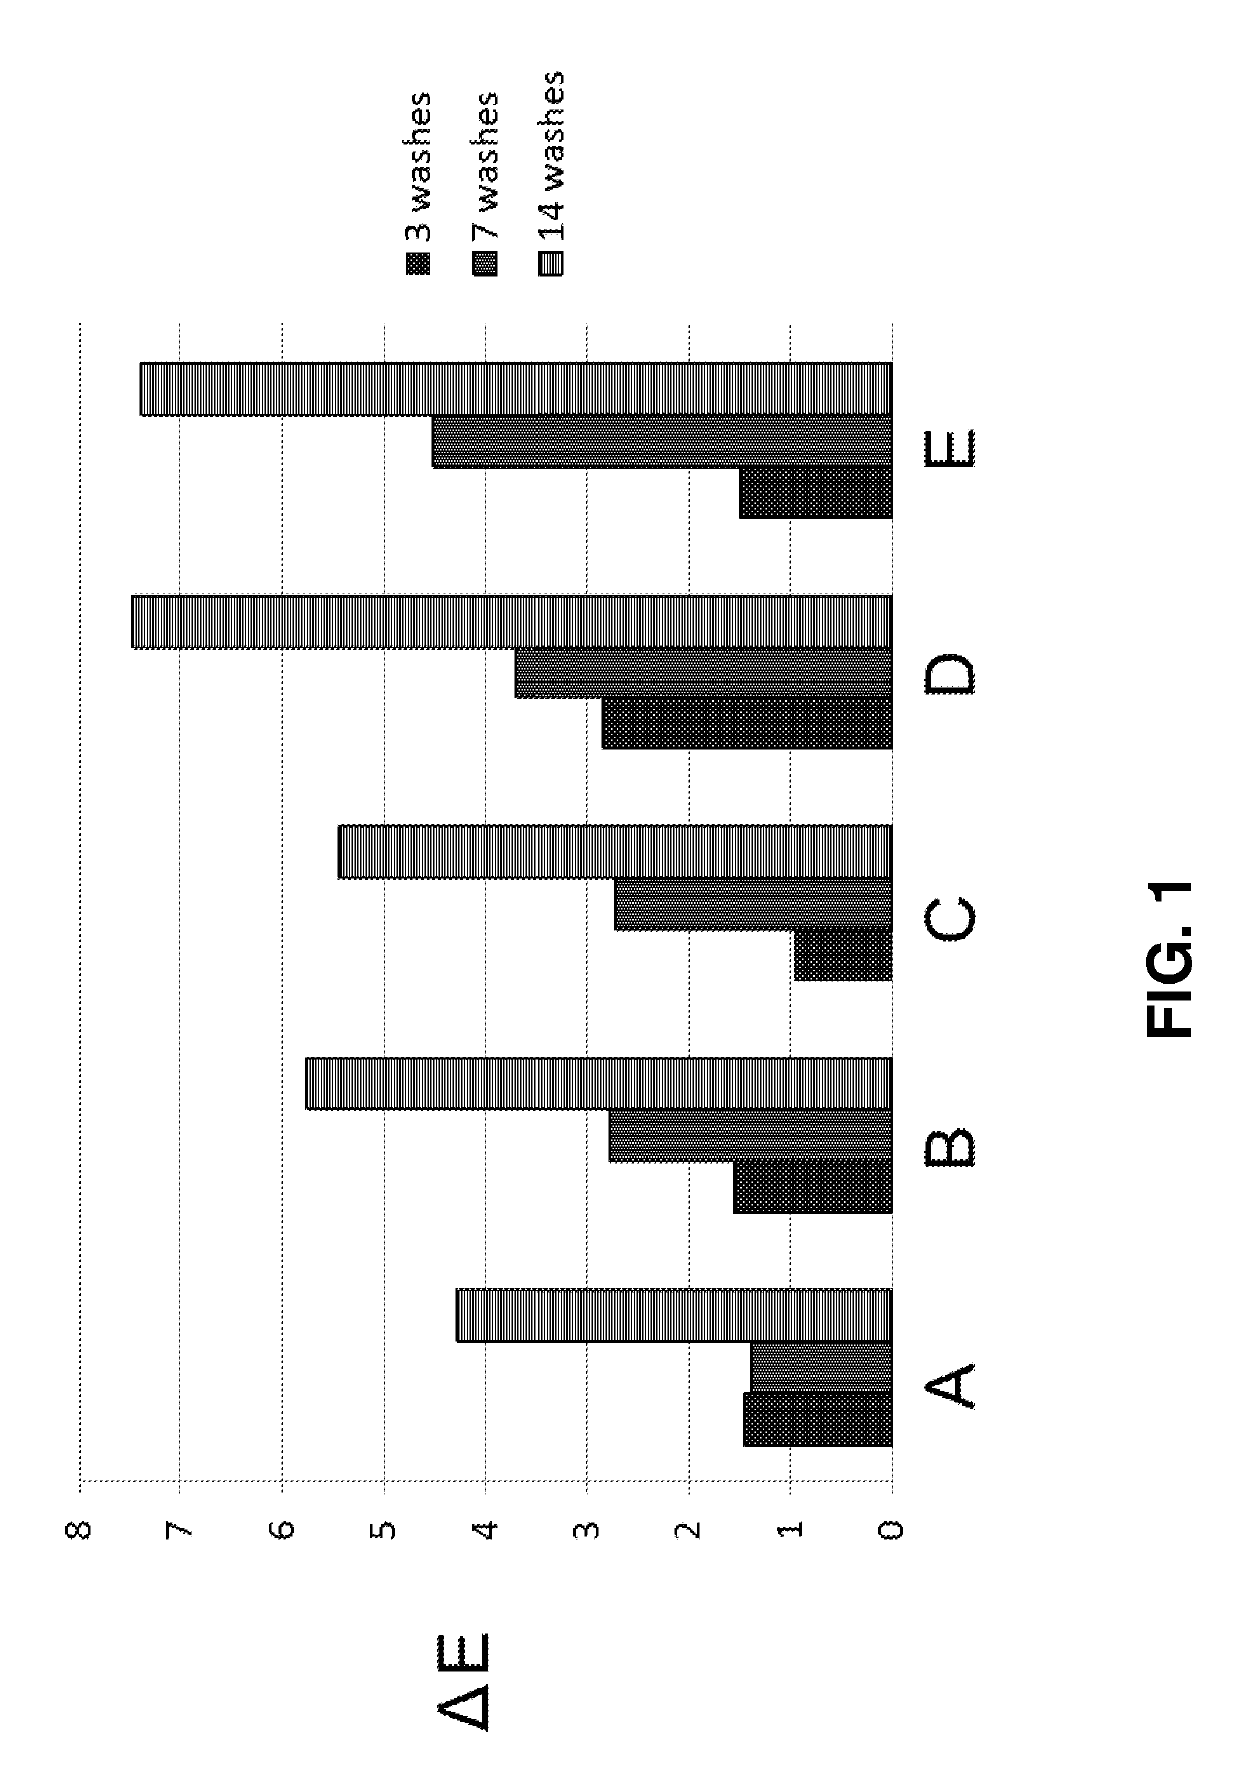 Methods and kits comprising an antioxidant booster composition for improving color durability in artificially colored hair